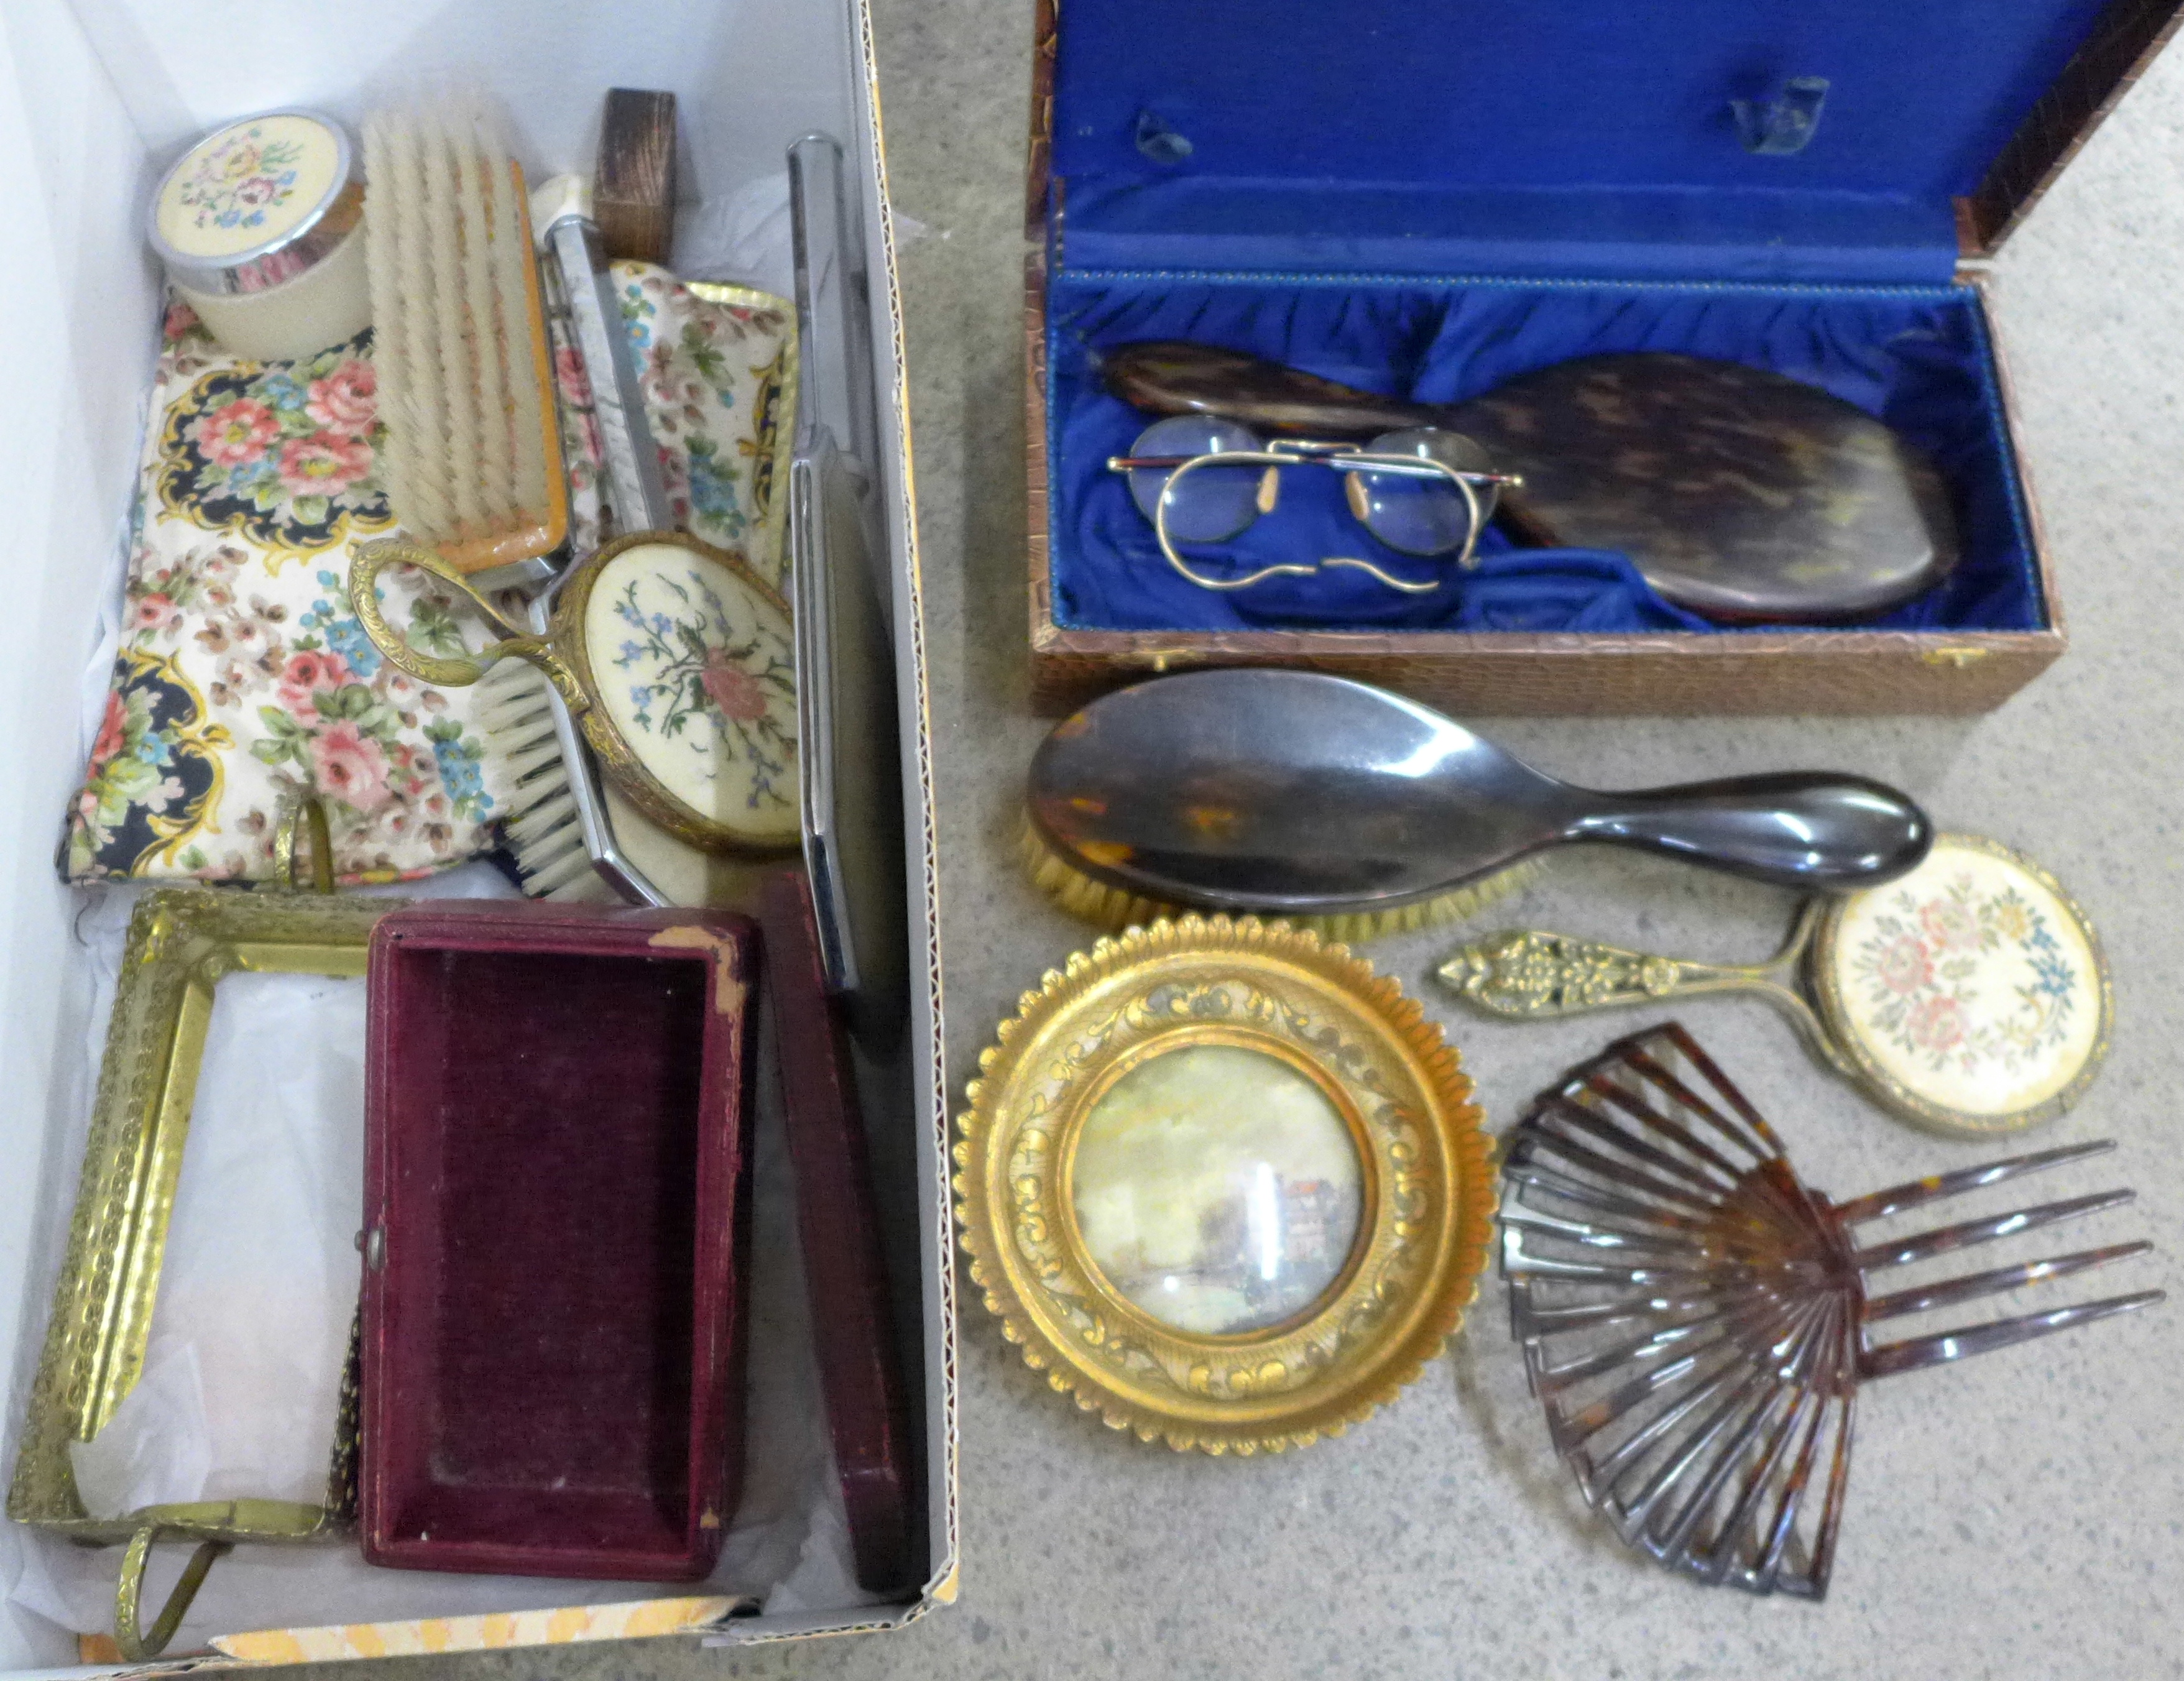 A pair of tortoiseshell rimmed spectacles, brush and mirror set, hair comb, etc.